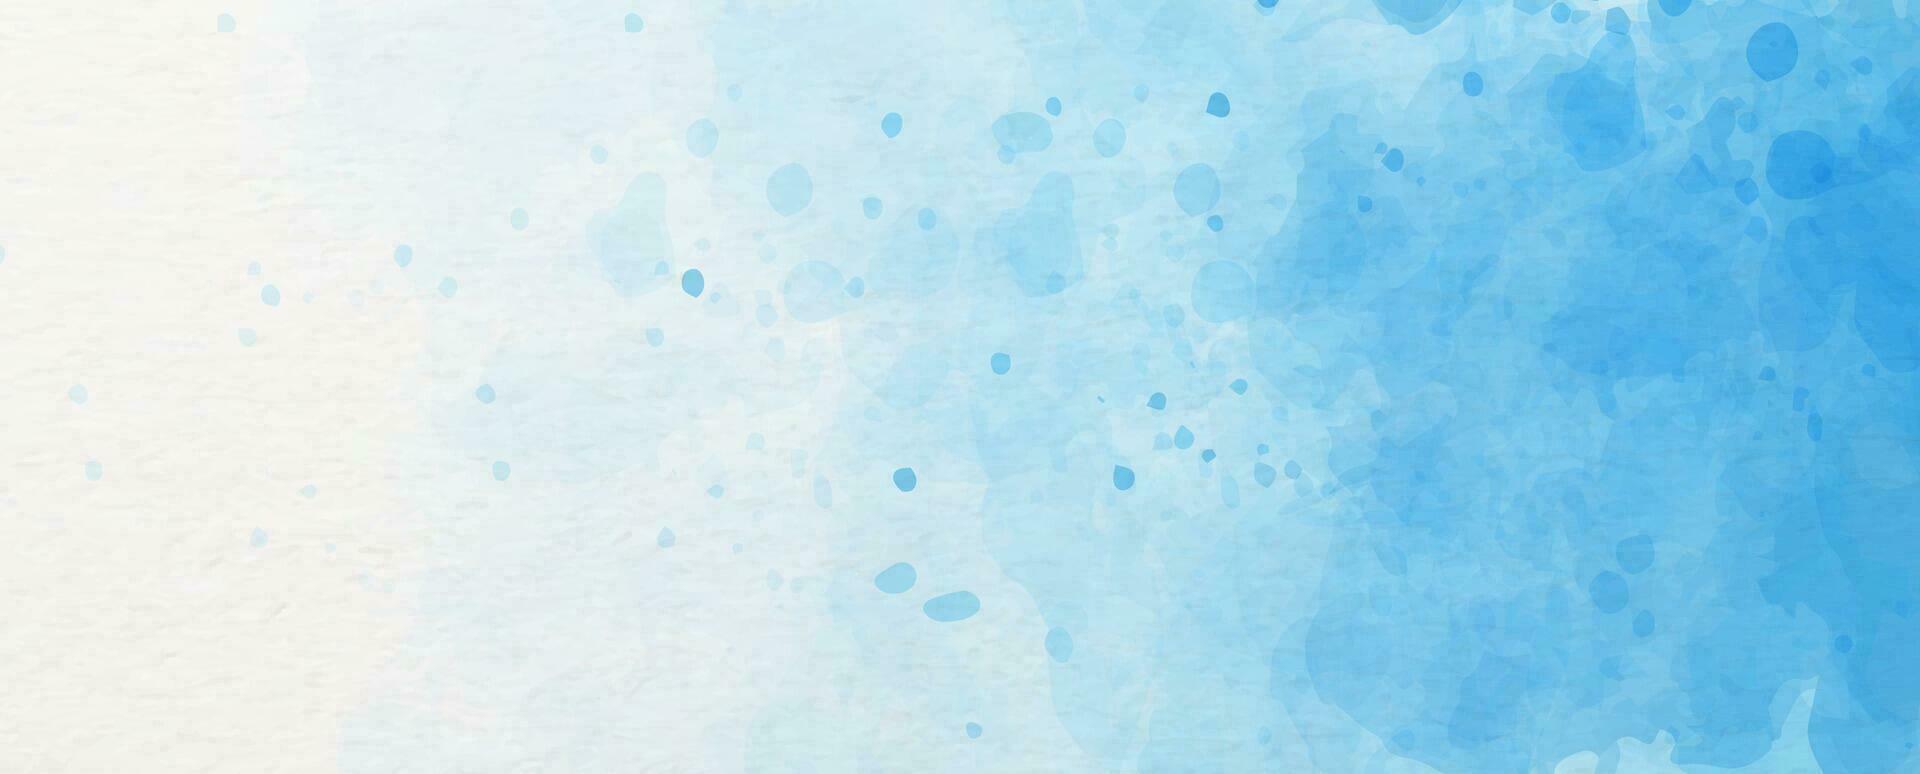 Blue watercolors pattern and background in banner and vector design.